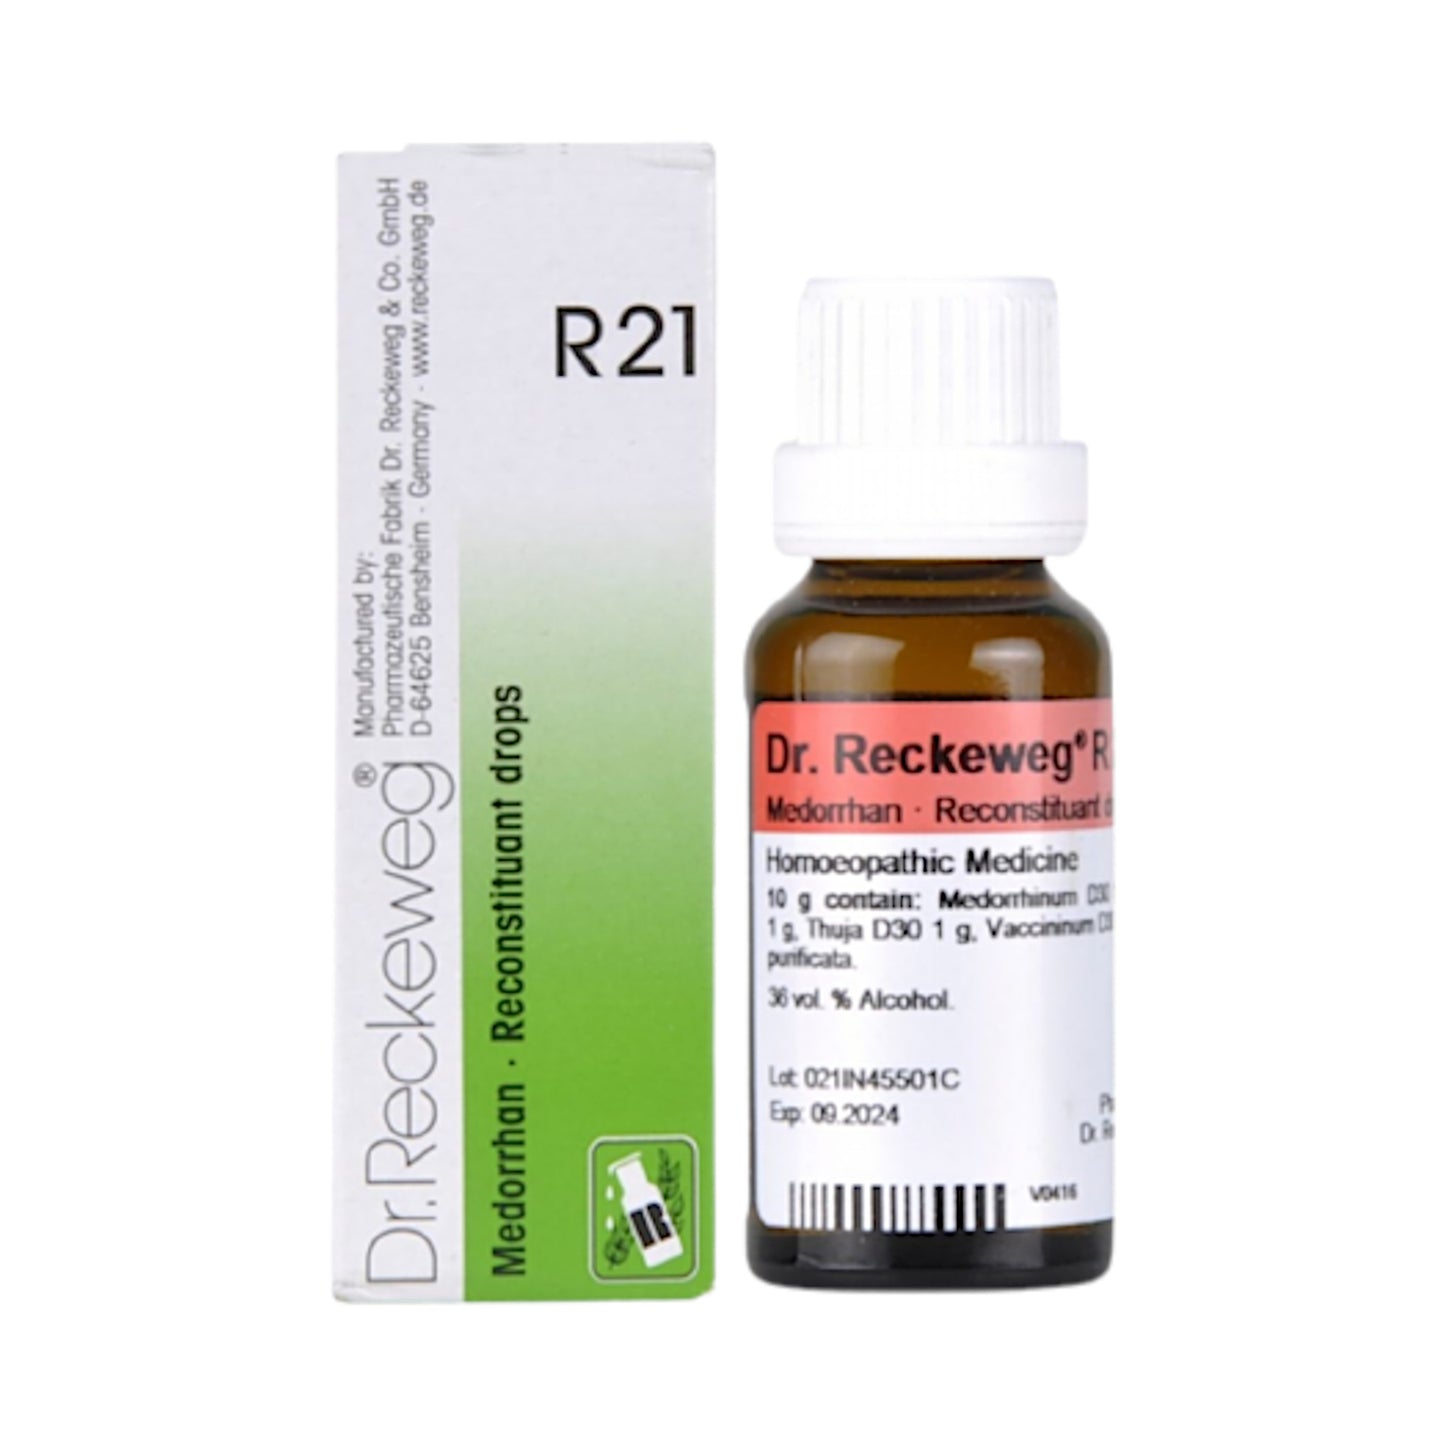 Image for DR. RECKEWEG R21 - Medorrhan Reconstitution Drops 22 ml - Homeopathic remedy for chronic eczema and skin diseases.